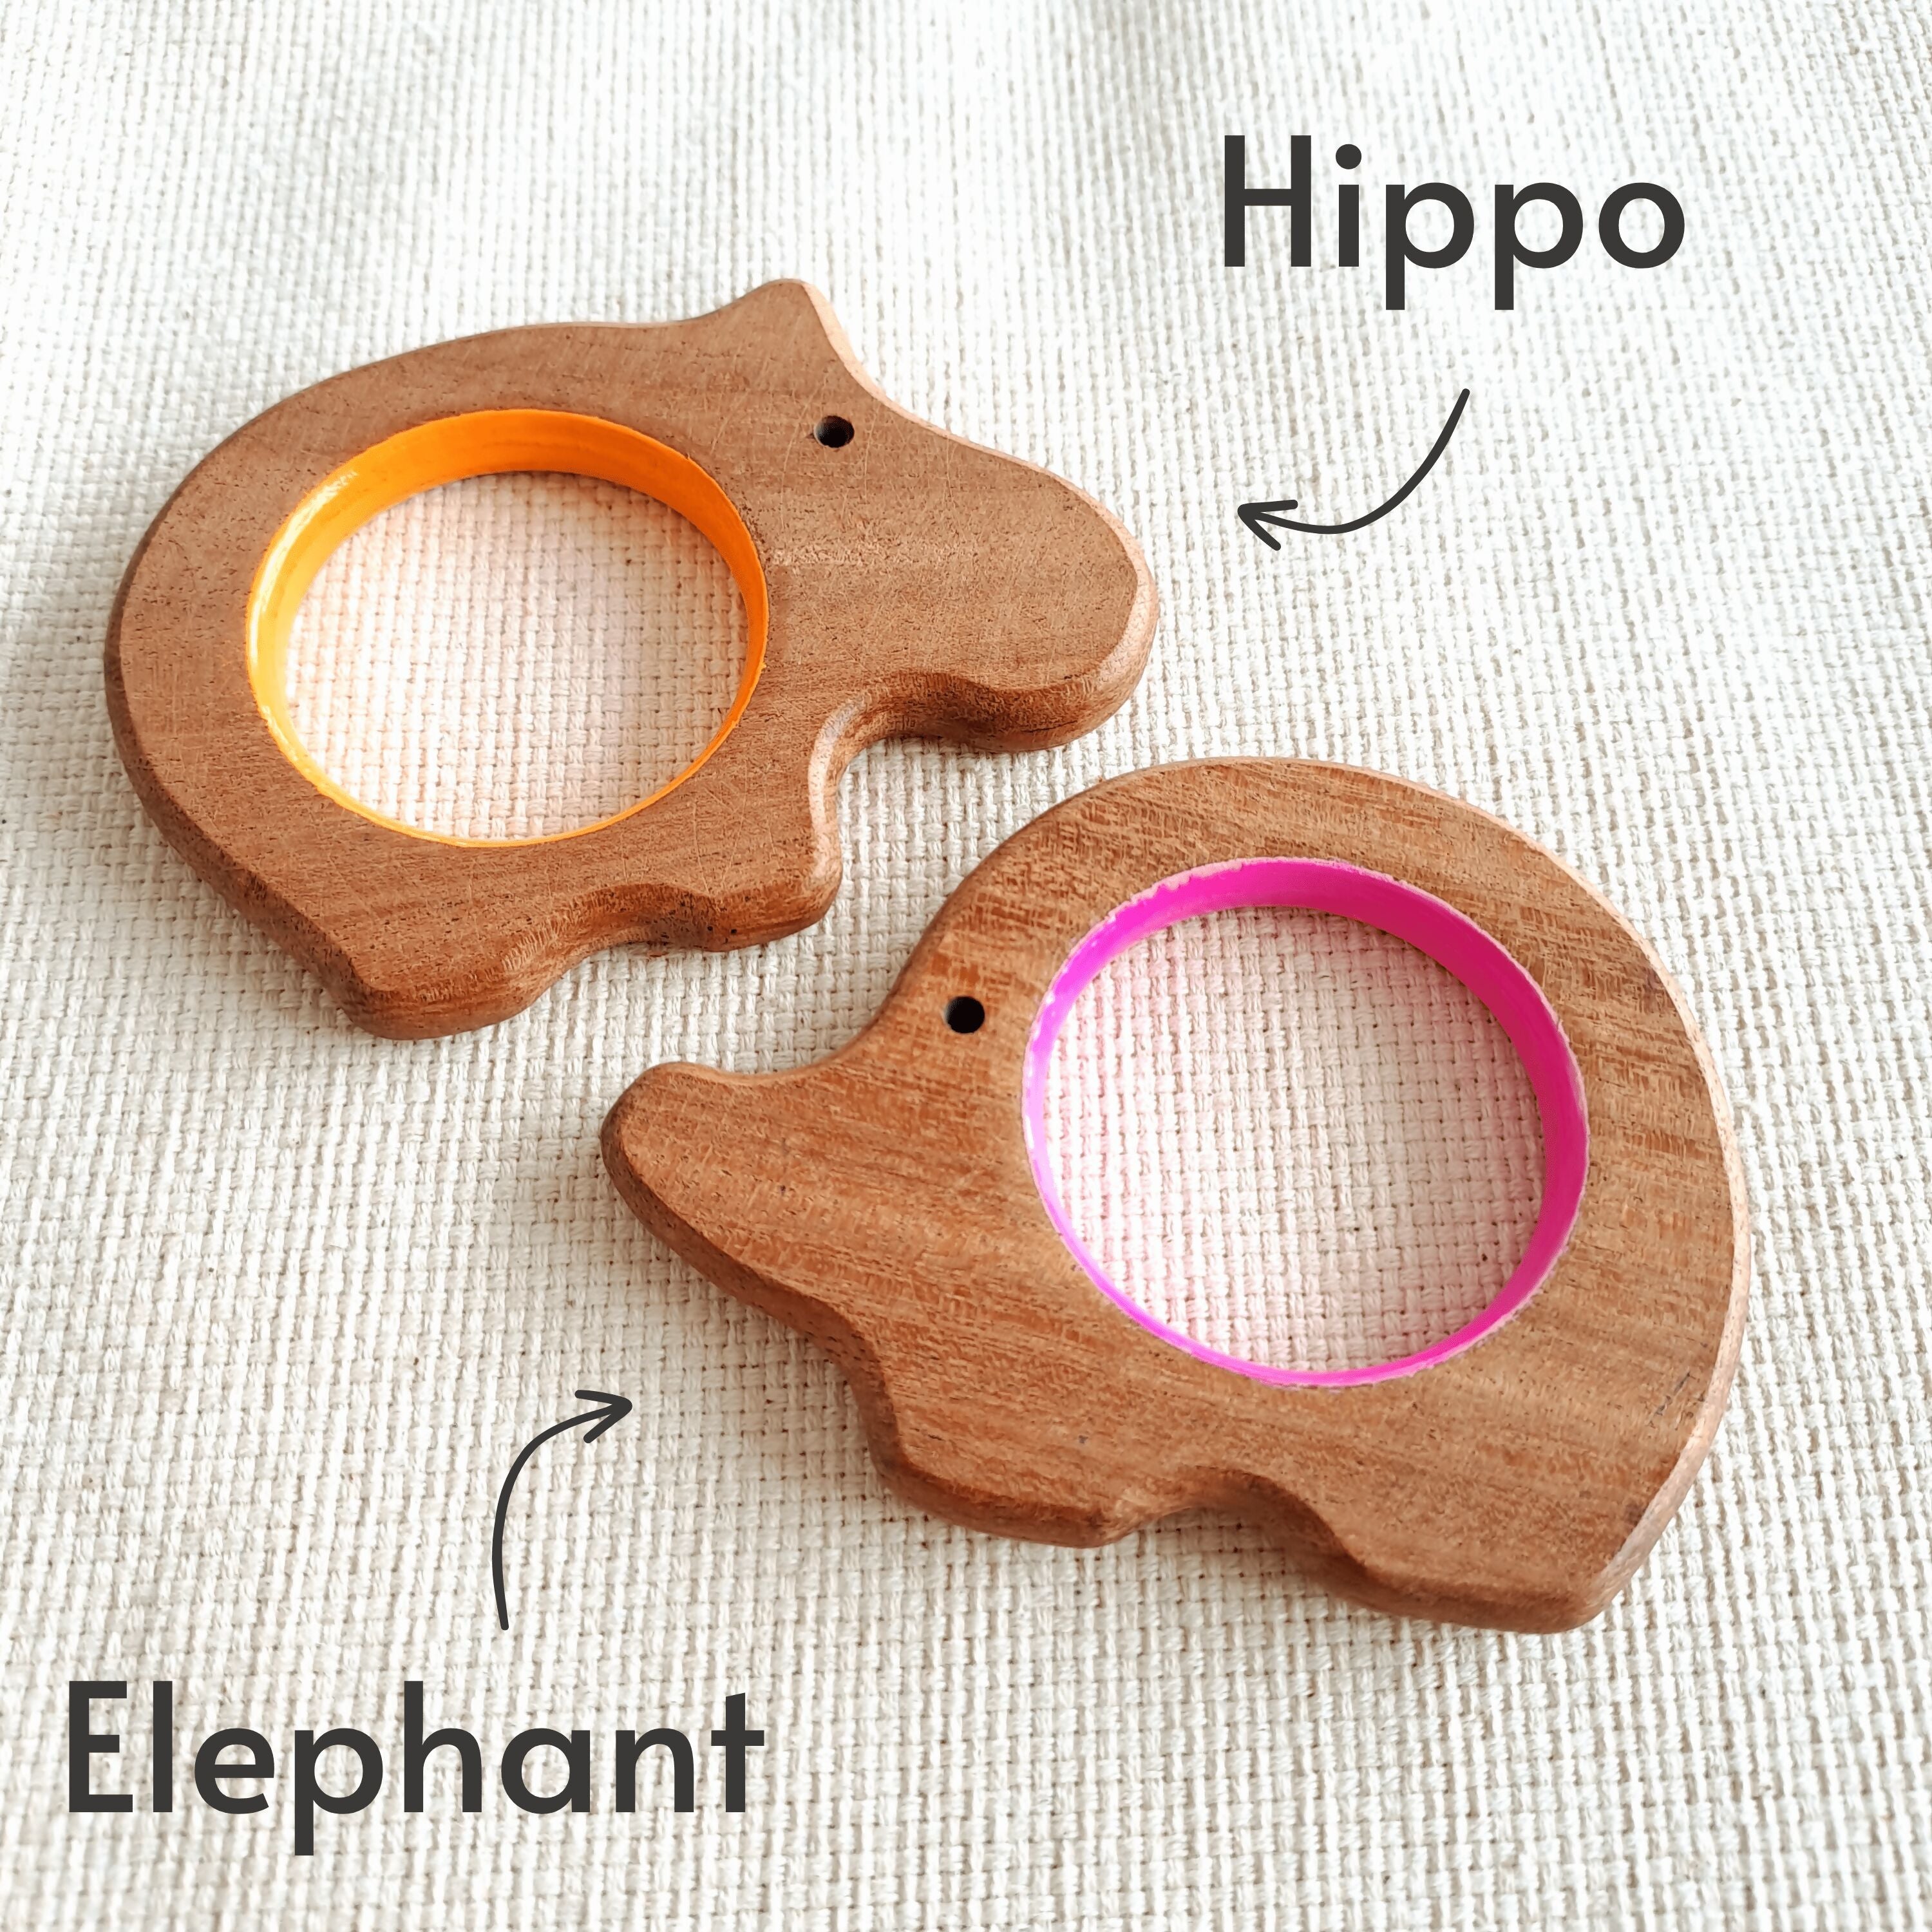 BABYCOV Cute Hippo and Elephant Natural Neem Wood Teethers for Babies | Natural and Safe | Goodness of Organic Neem Wood | Both Chewing and Grasping Toy | Set of 2 (Age 4+ Months) - PyaraBaby